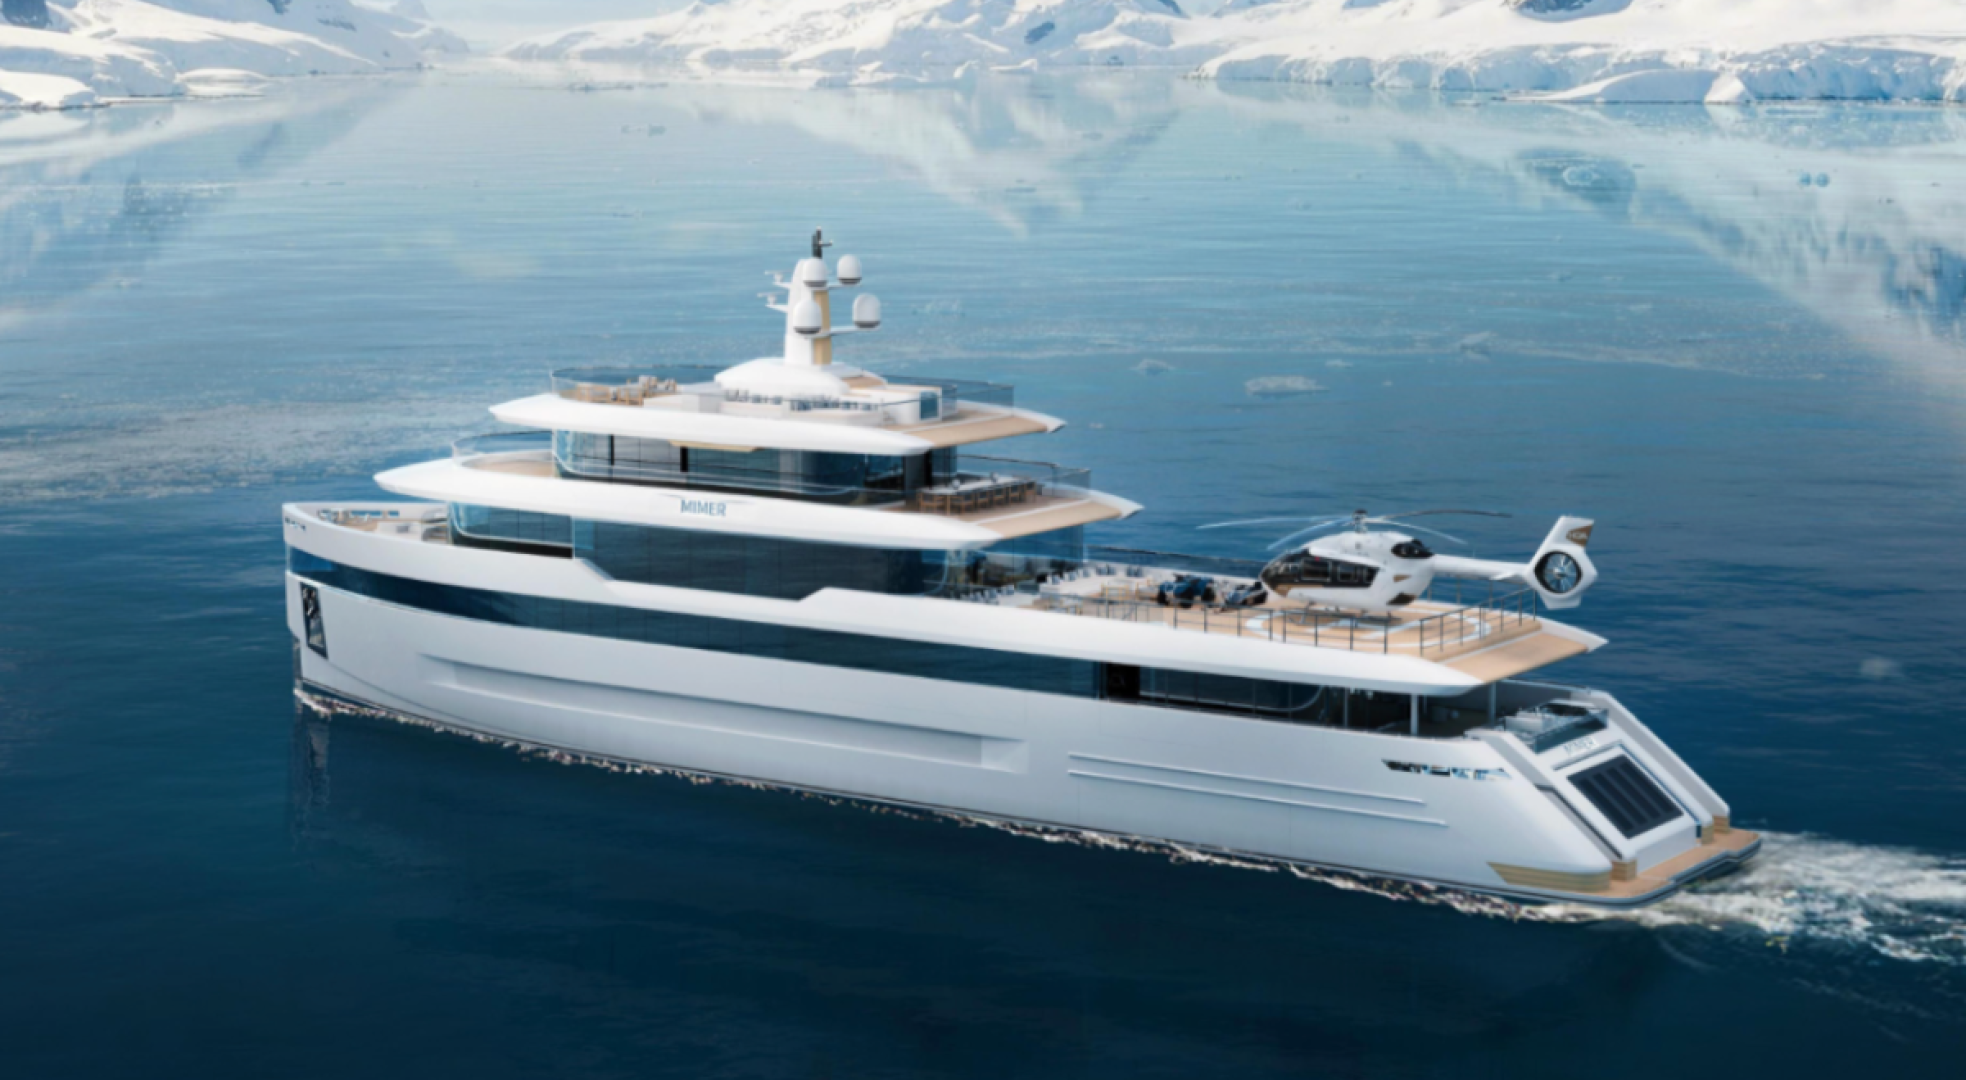 Viken Group selected AES Yacht as partner for 60m project Mimer